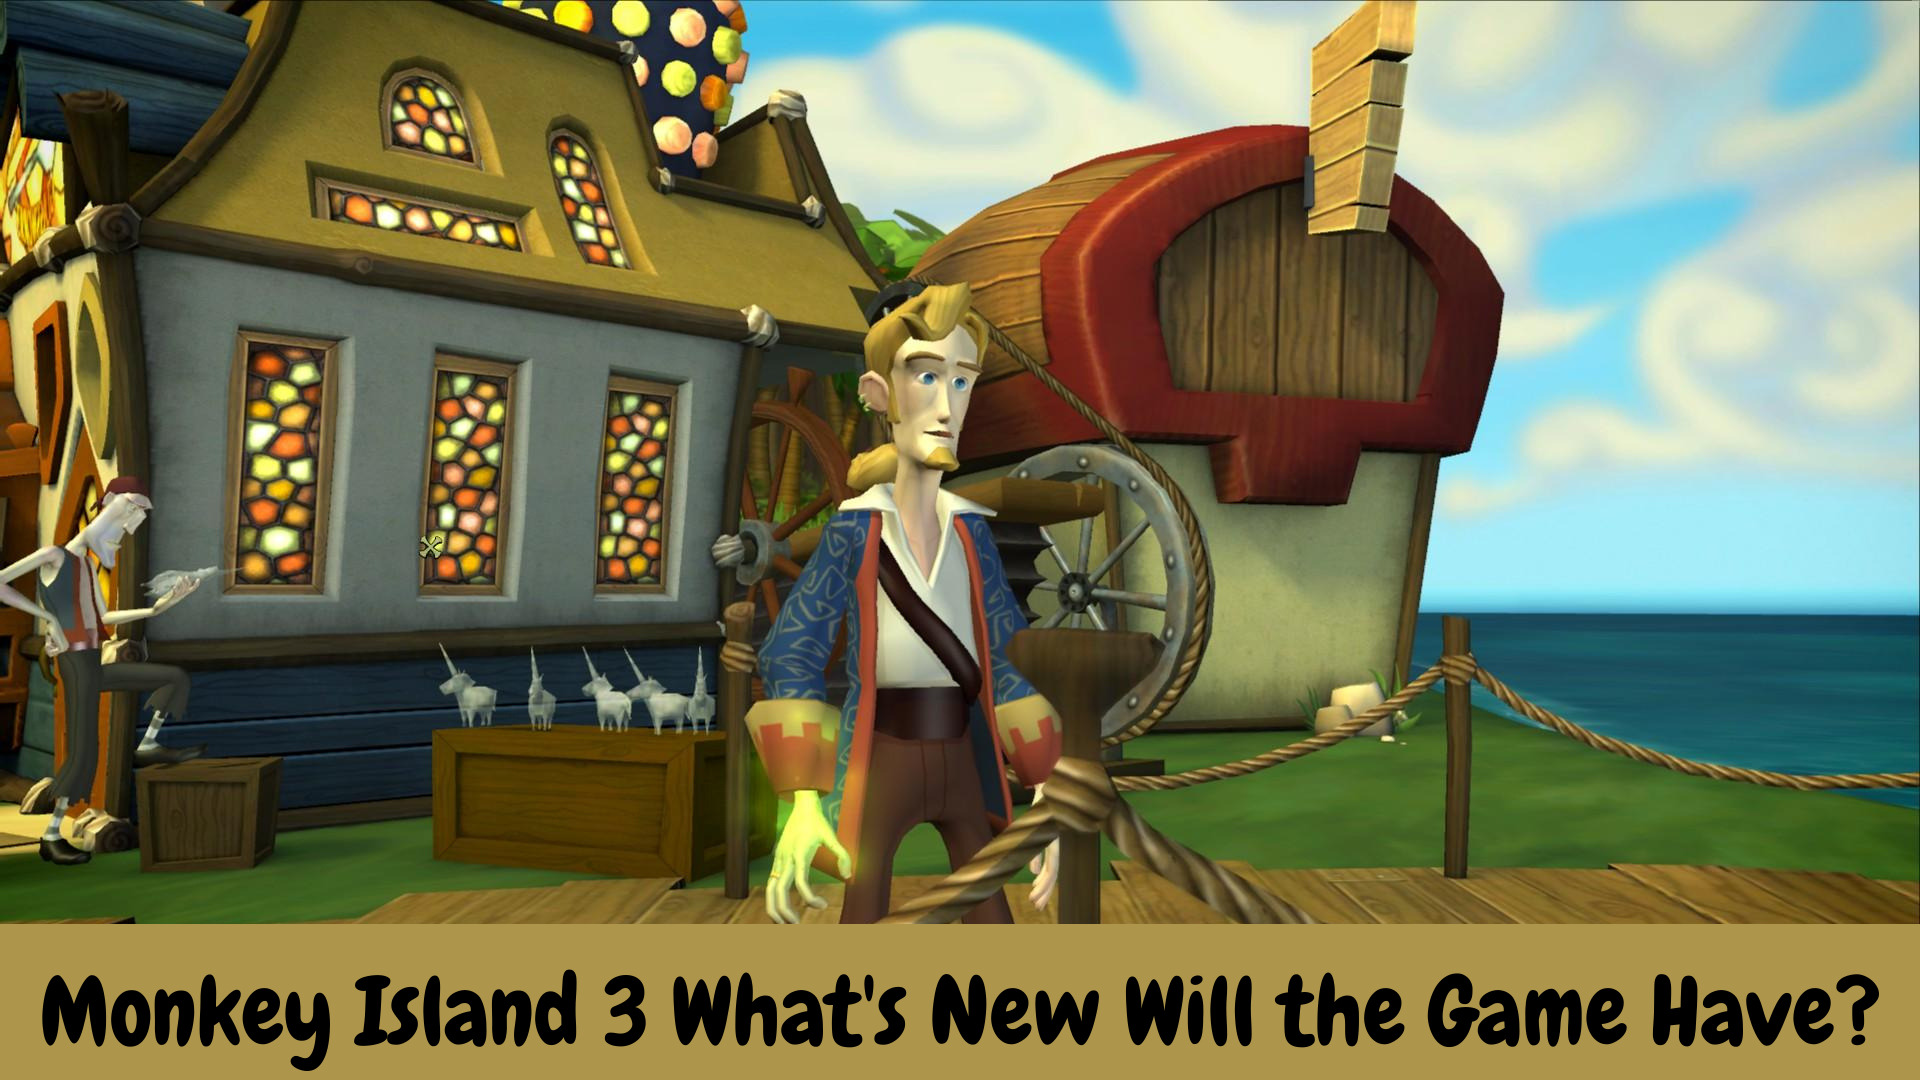 Monkey Island 3 What's New Will the Game Have?